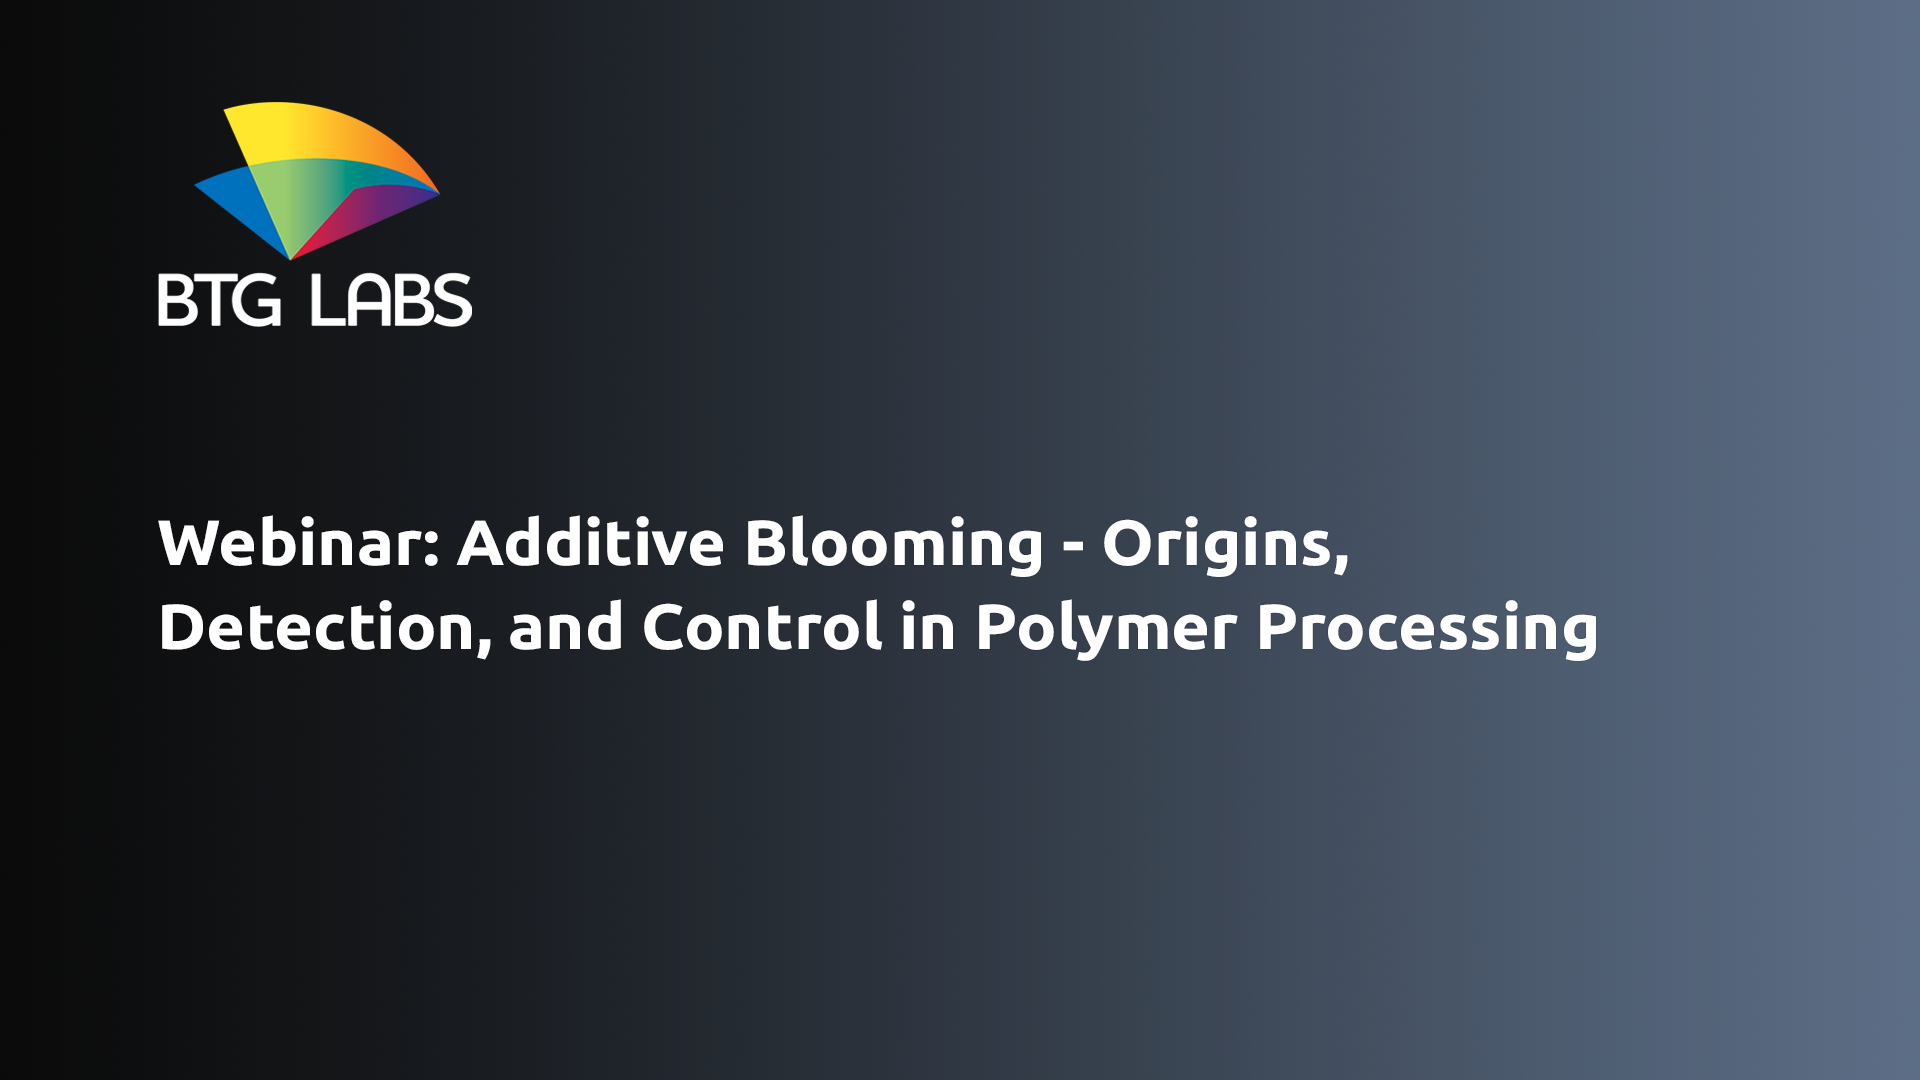 Webinar: Additive Blooming - Origins, Detection, and Control in Polymer Processing